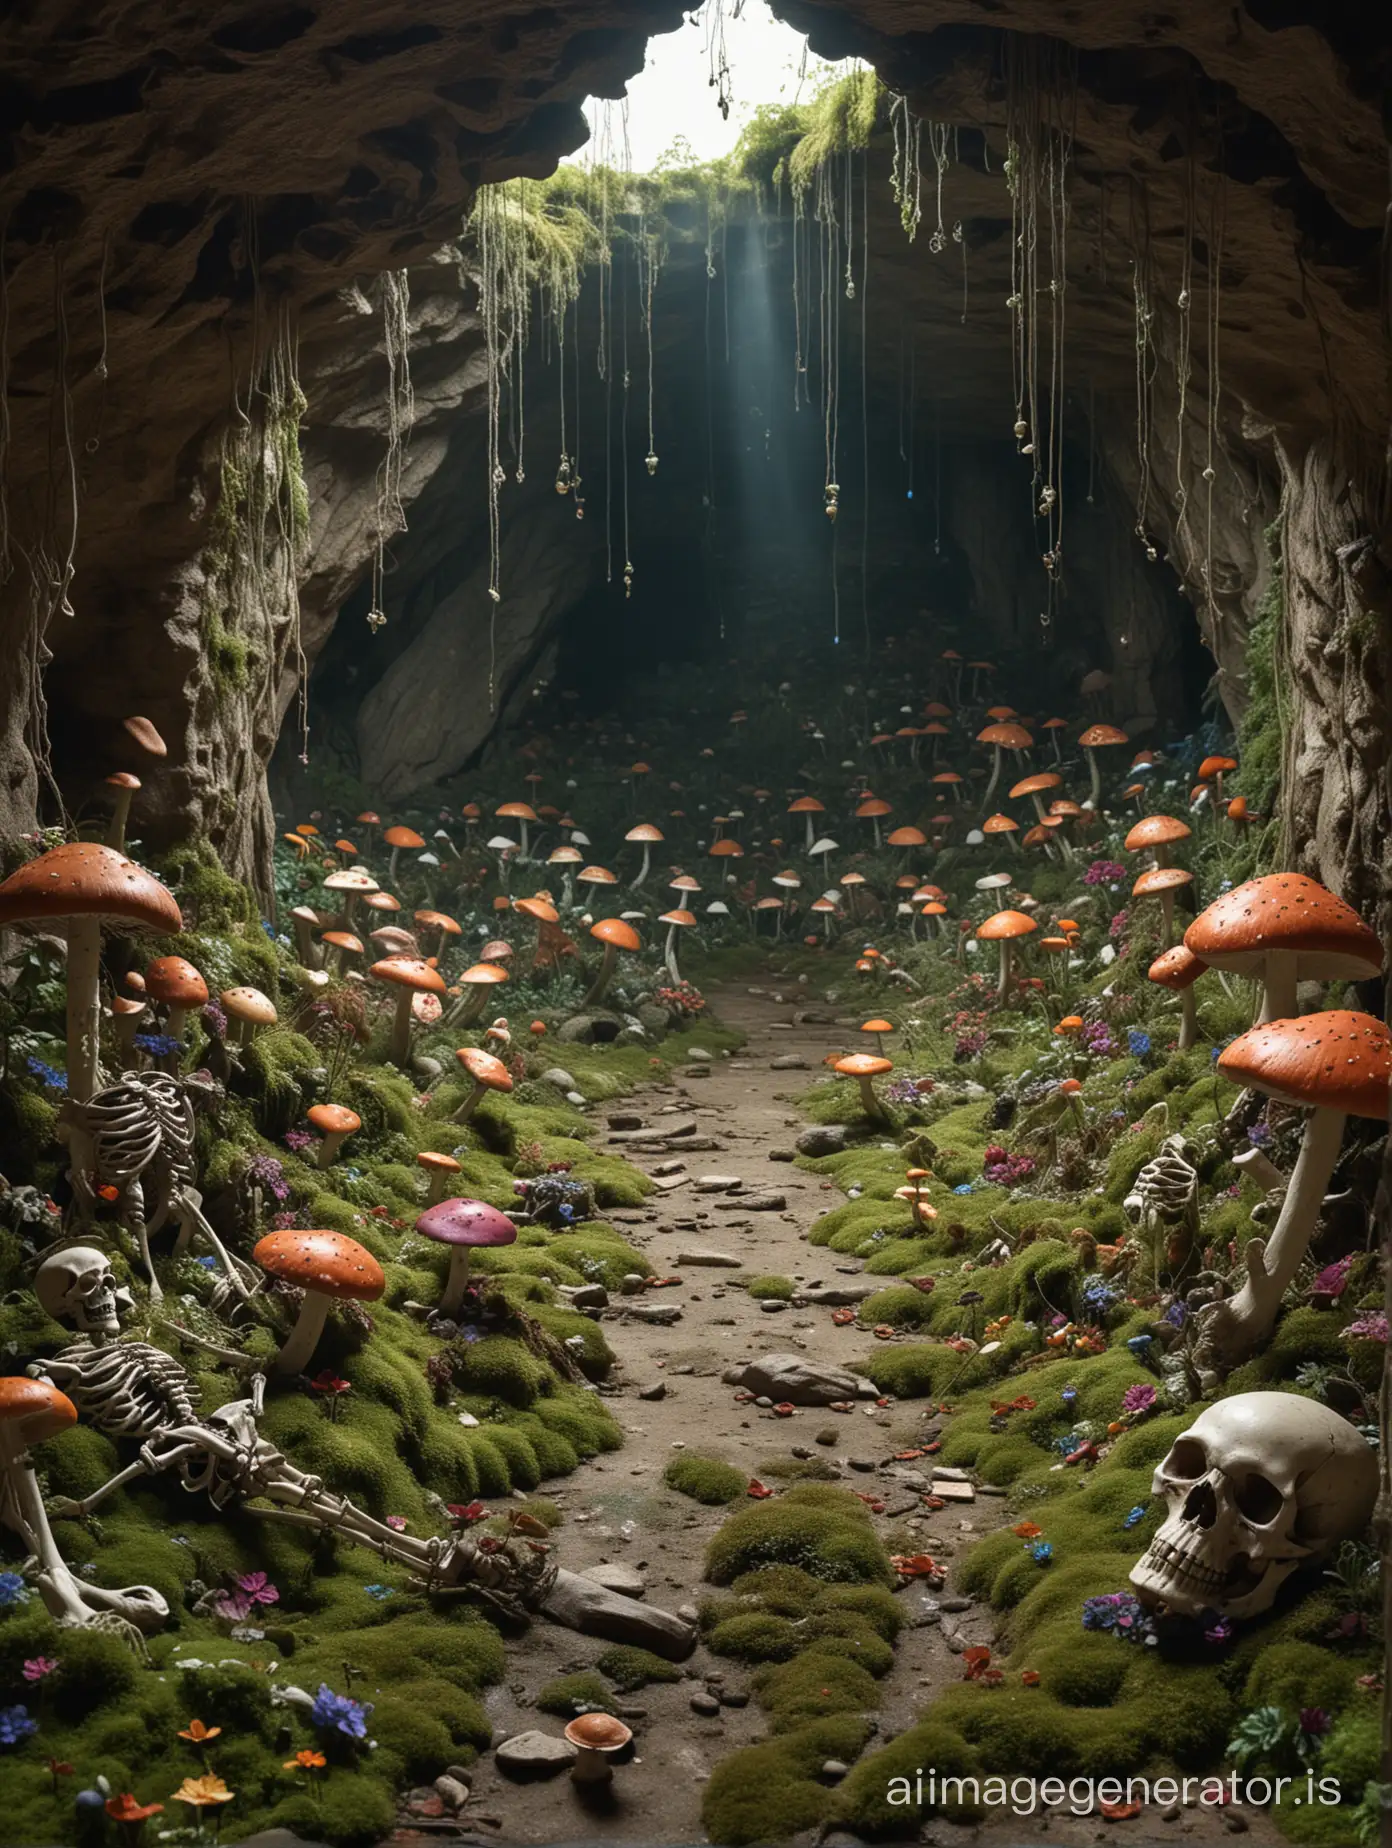 Fantasy-Adventurers-Descend-into-Mysterious-Cave-of-Bones-and-Mushrooms